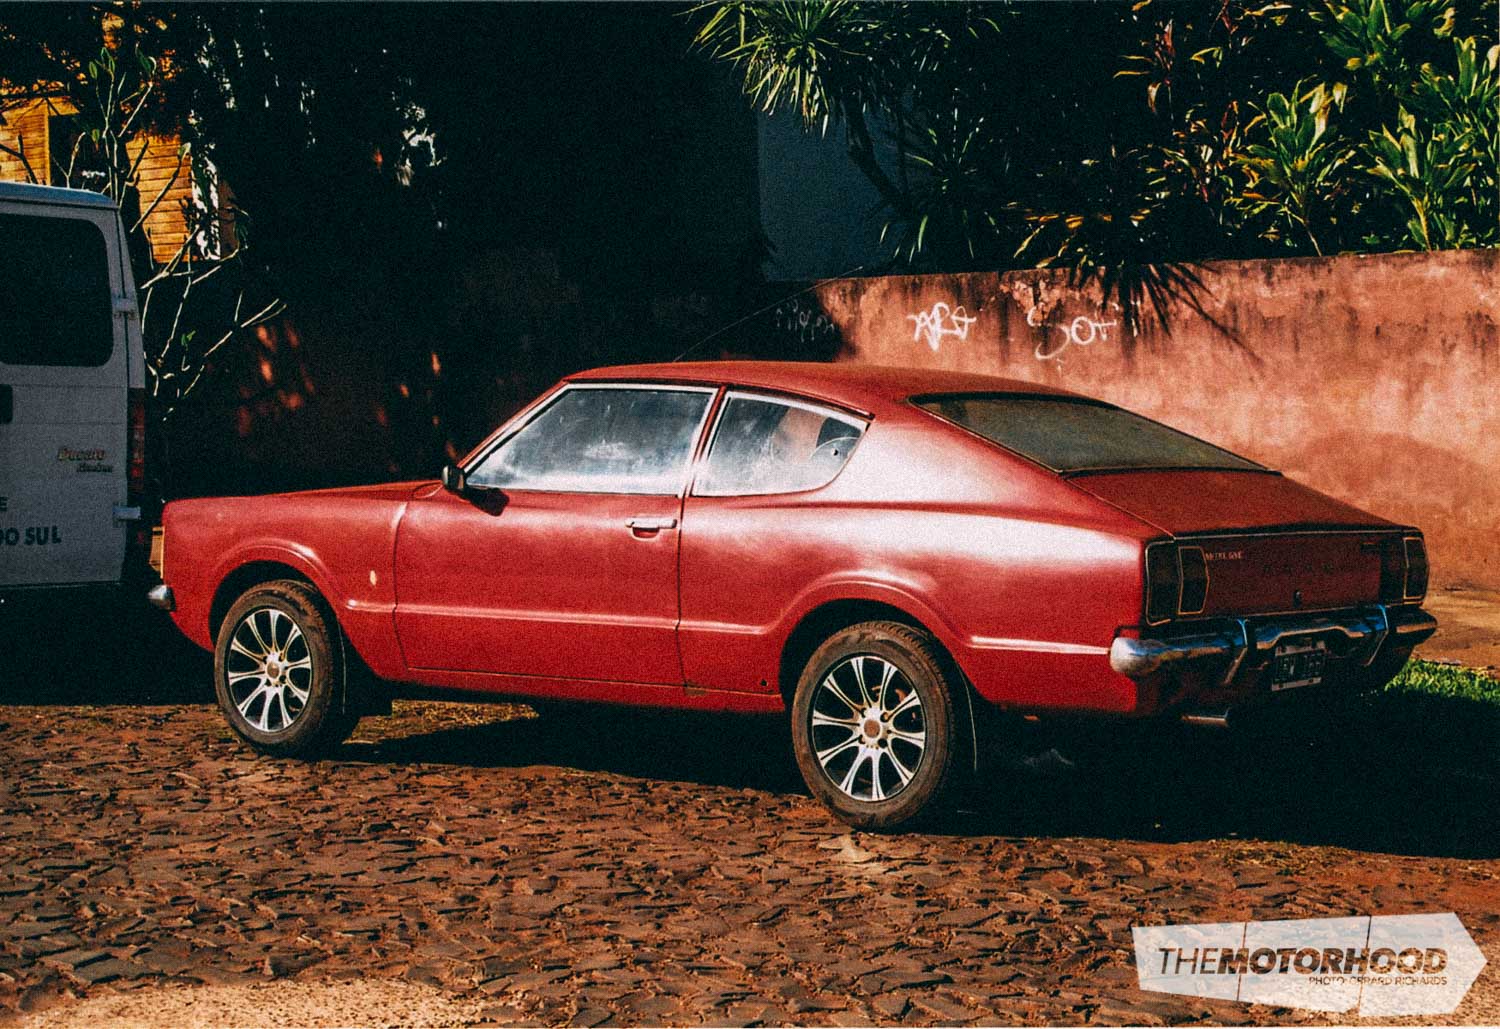 Fastback Ford Taunus coupé in Puerto Iguazu – early ‘70s Cortina equivalent. Pity we never got this model in NZ